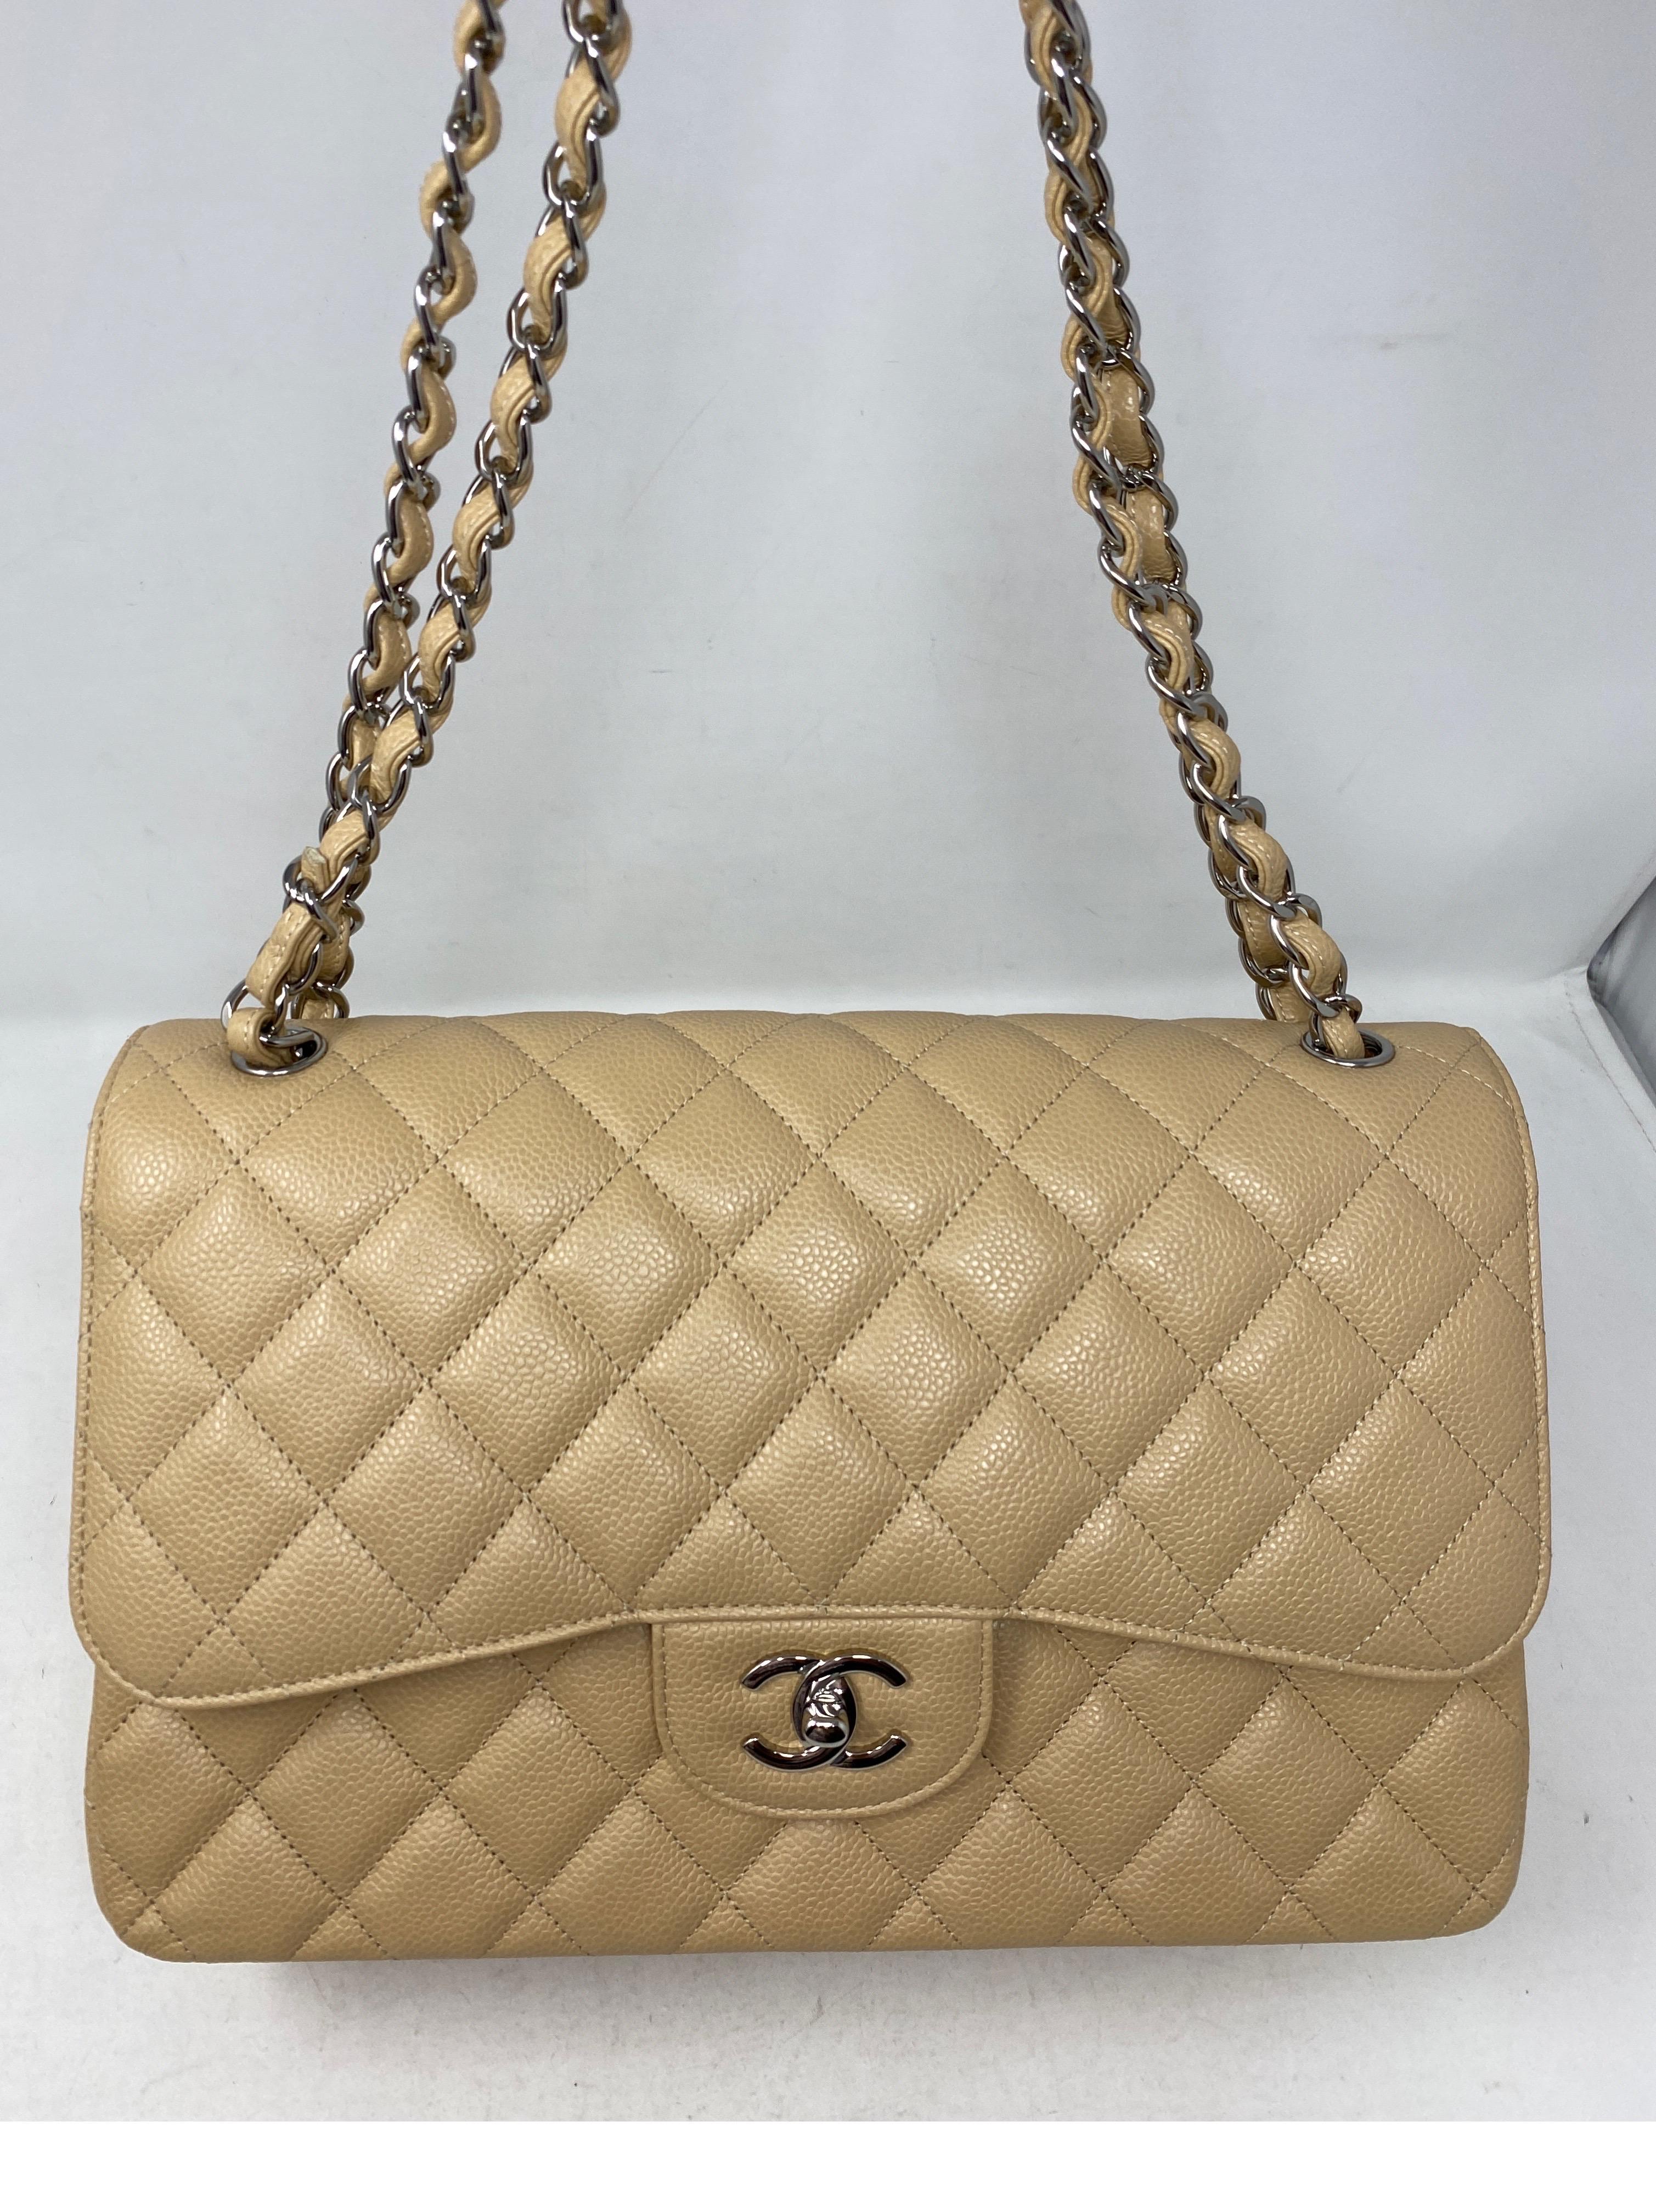 Chanel Beige Jumbo Double Flap Bag. Light cream color caviar leather bag. Silver hardware. Excellent like new condition. Most wanted color for the season. Can be worn crossbody or as a shoulder bag. Includes authenticity card. Guaranteed authentic. 